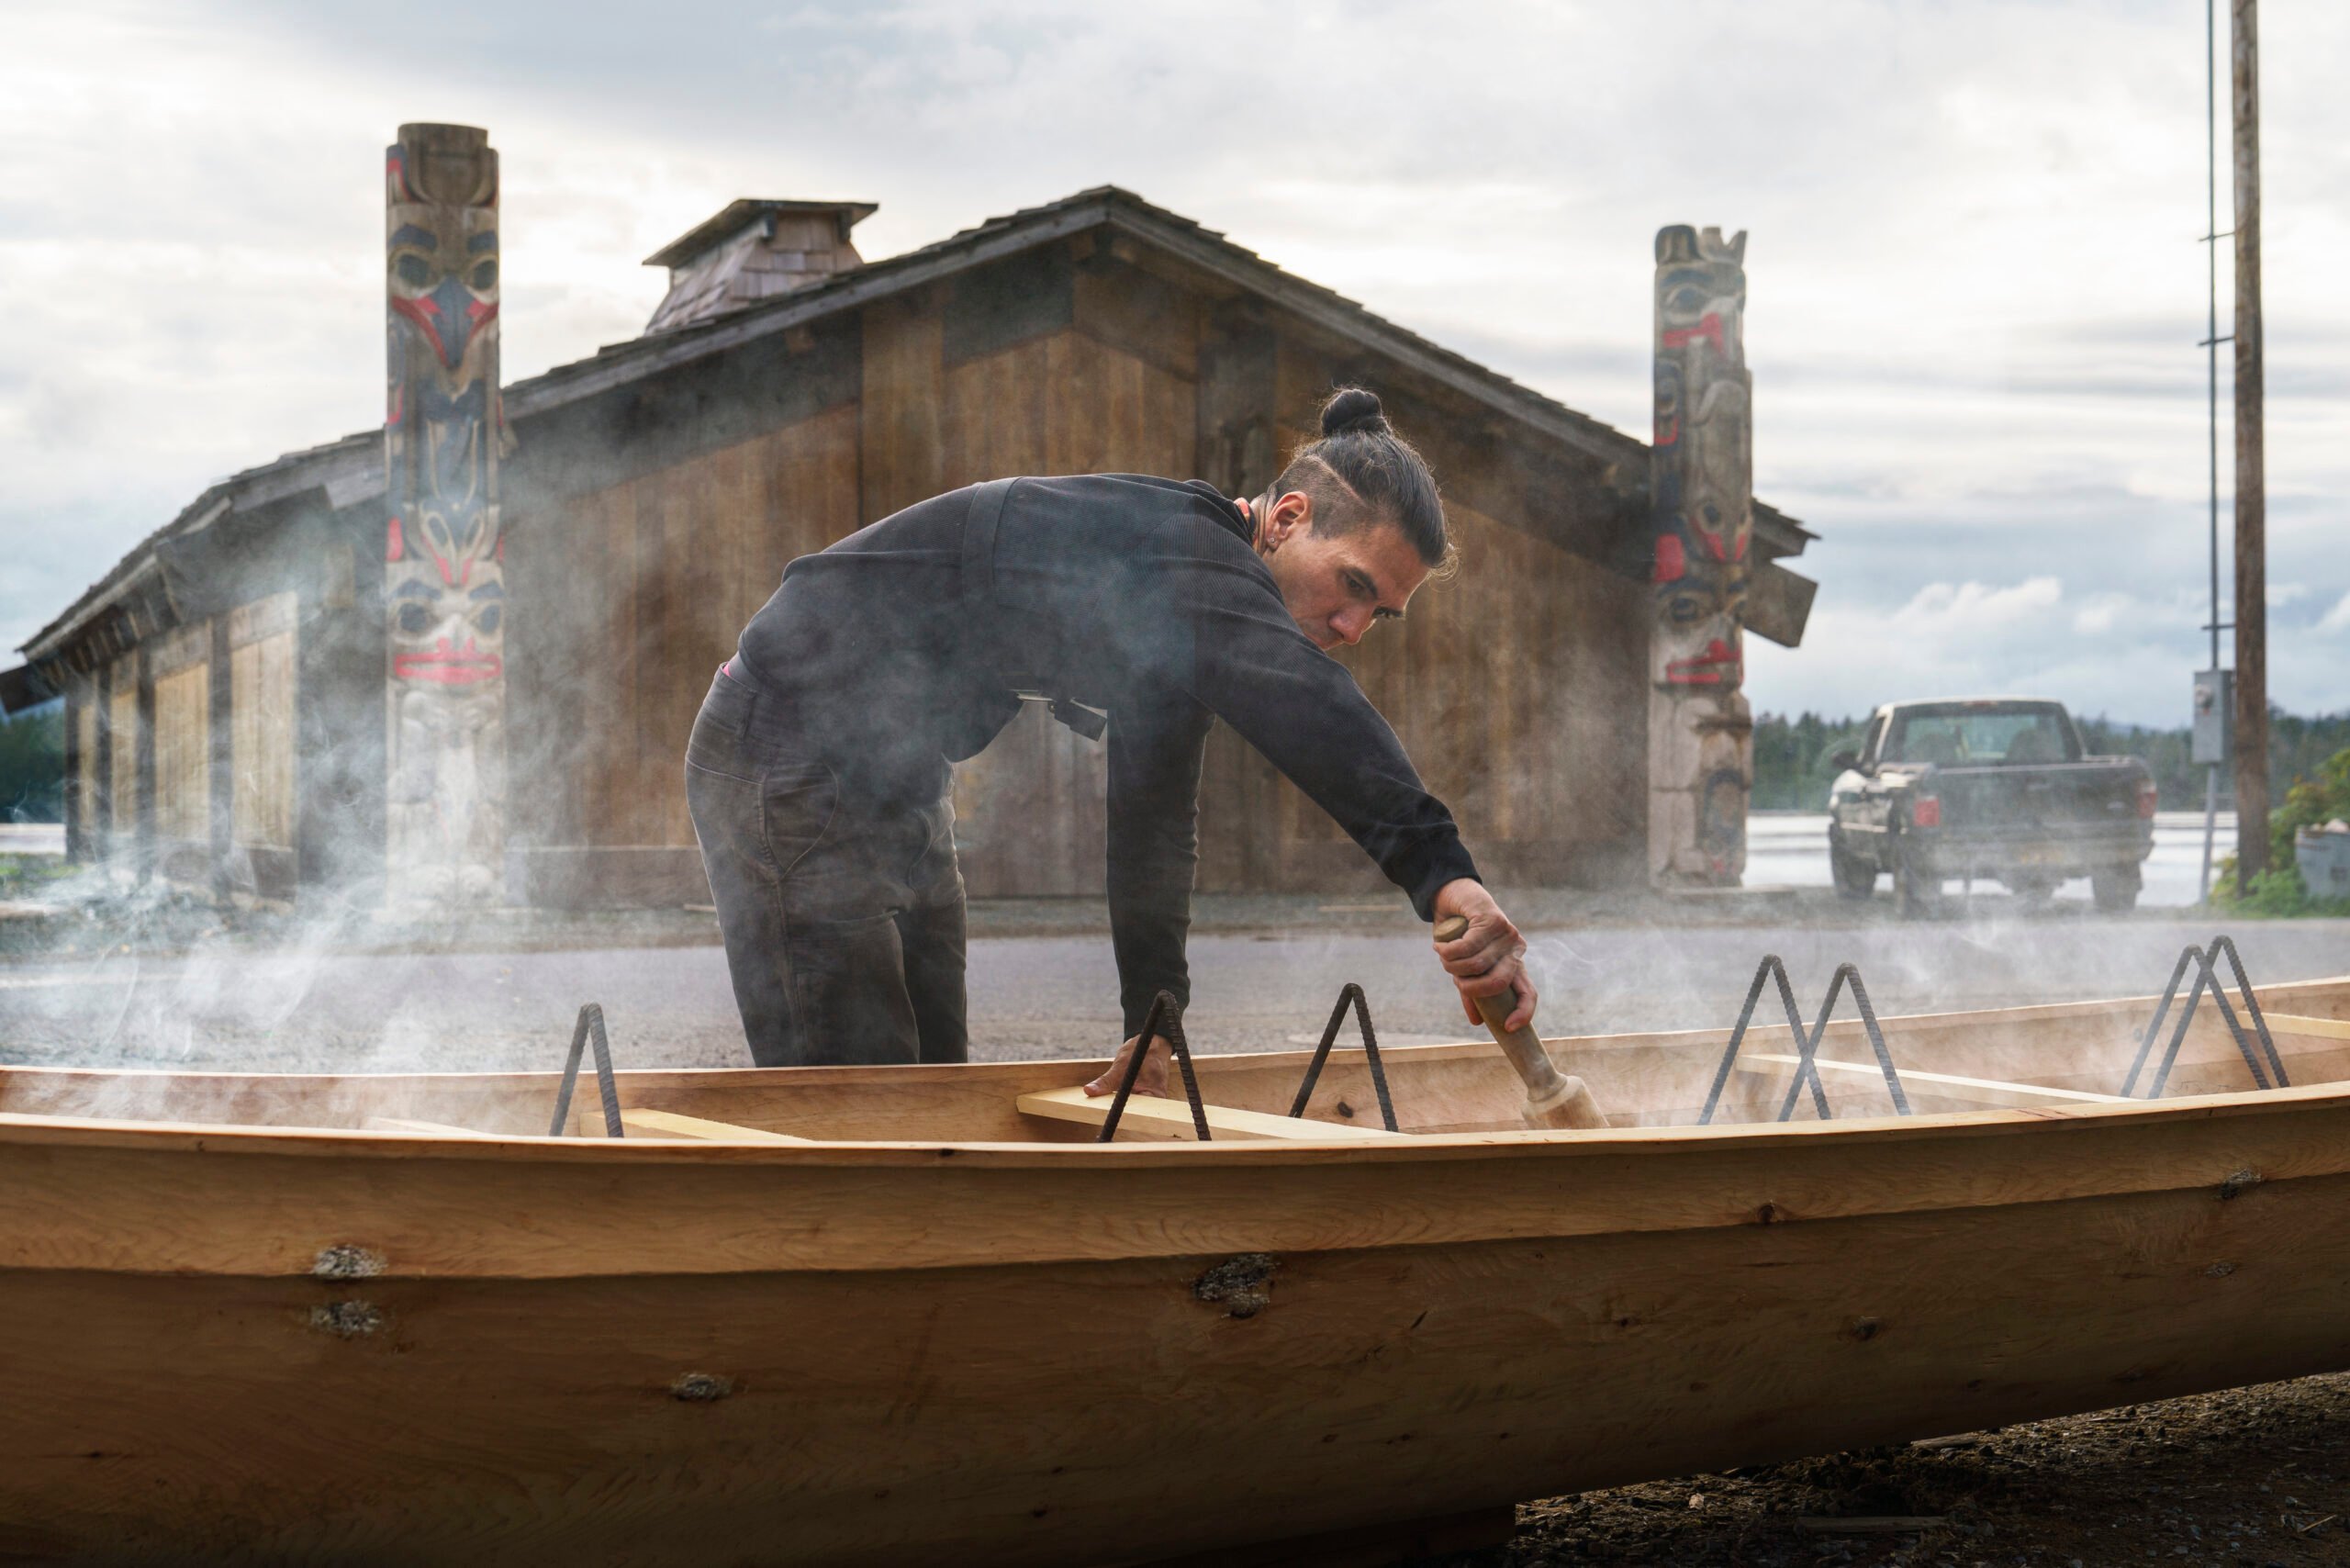 An artist works on a boat. Photography by Fernando Decillis for Smithsonian Magazine